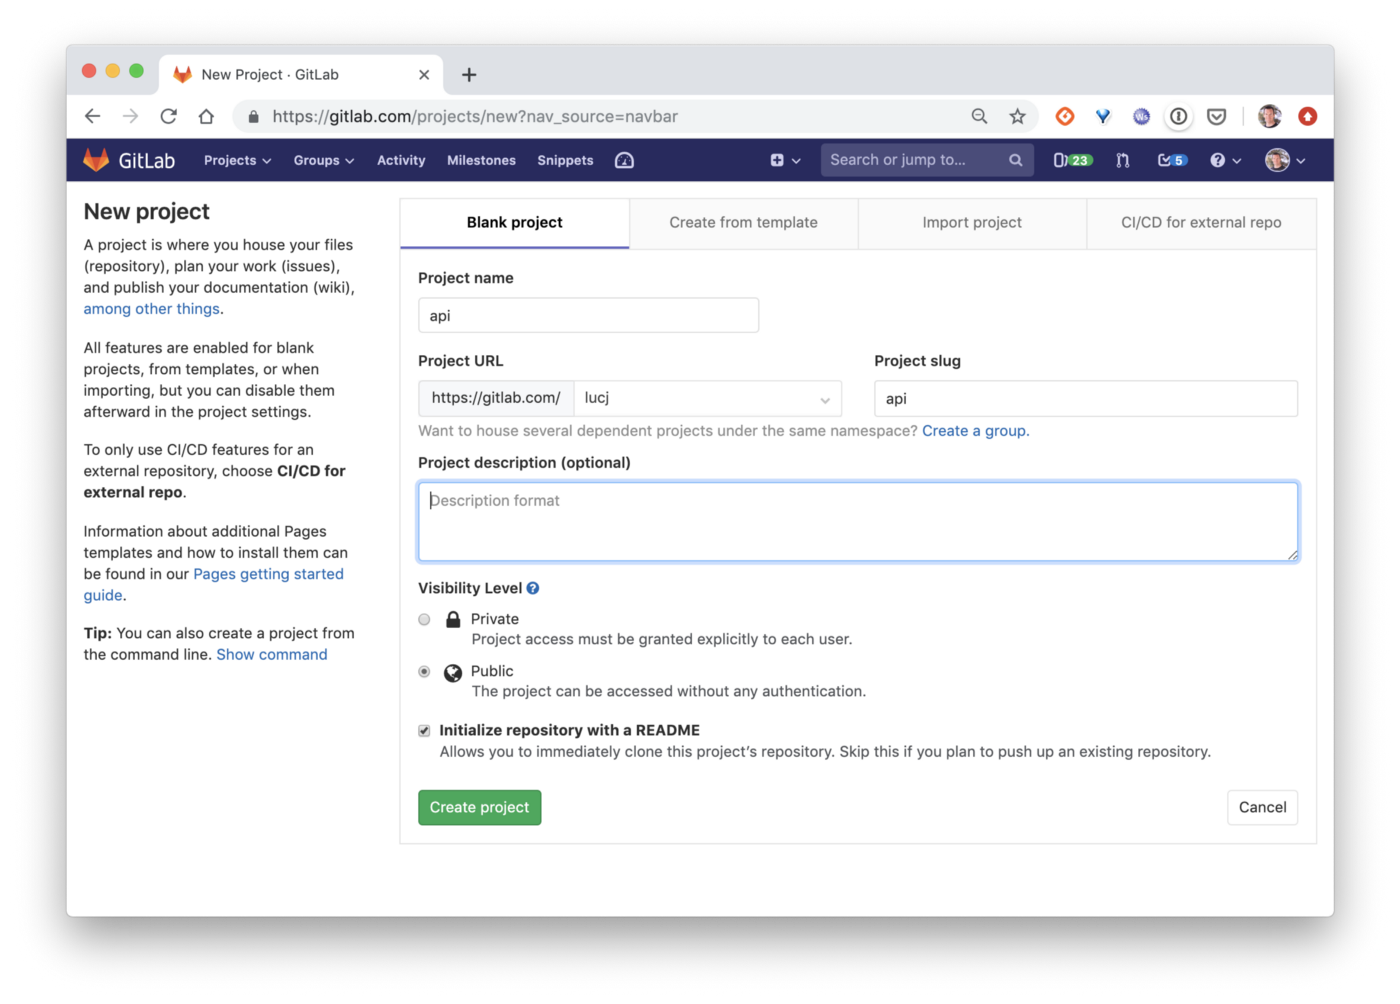 content/wechat/articles/2020/05/2020-05-06-using-a-k3s-kubernetes-cluster-for-your-gitlab-project/create-gitlab-project.png